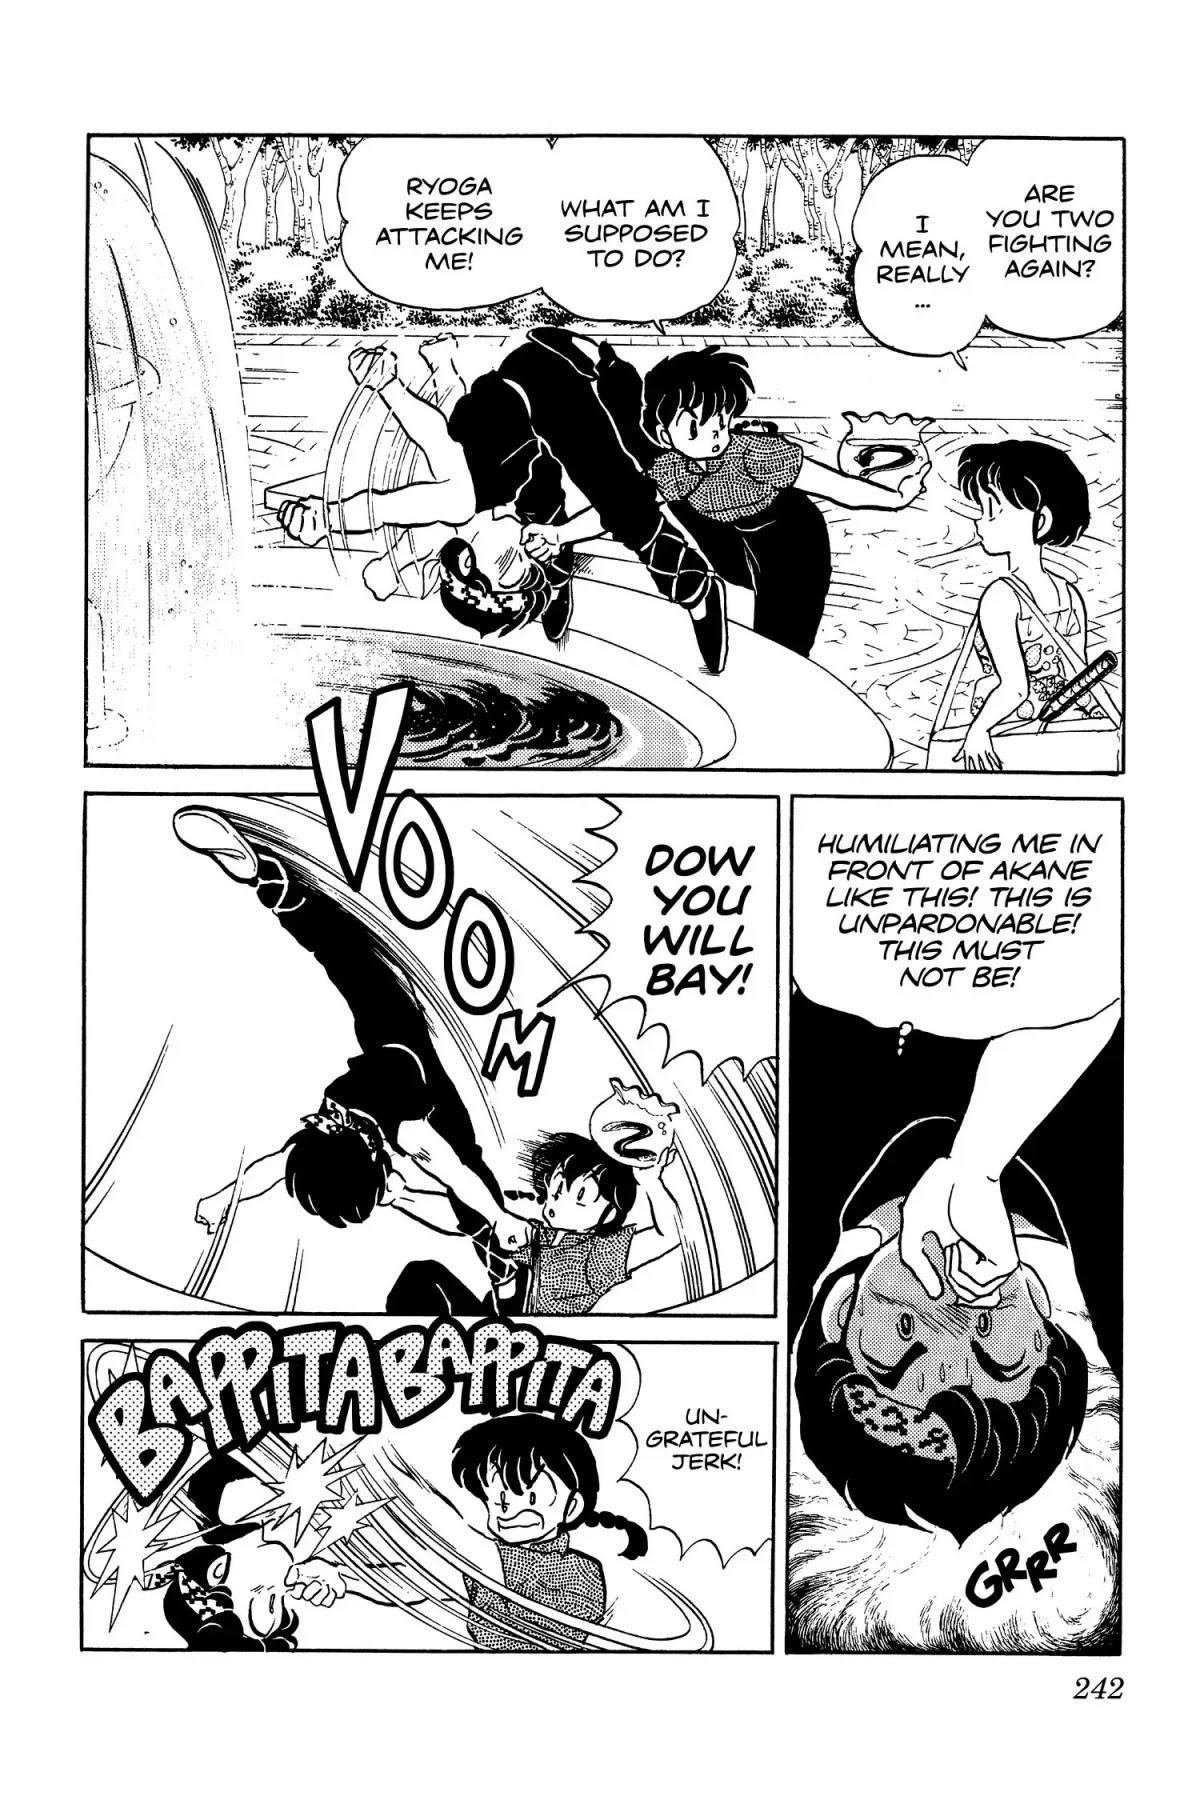 Ranma 1/2 Chapter 51: Care To Join Me?  